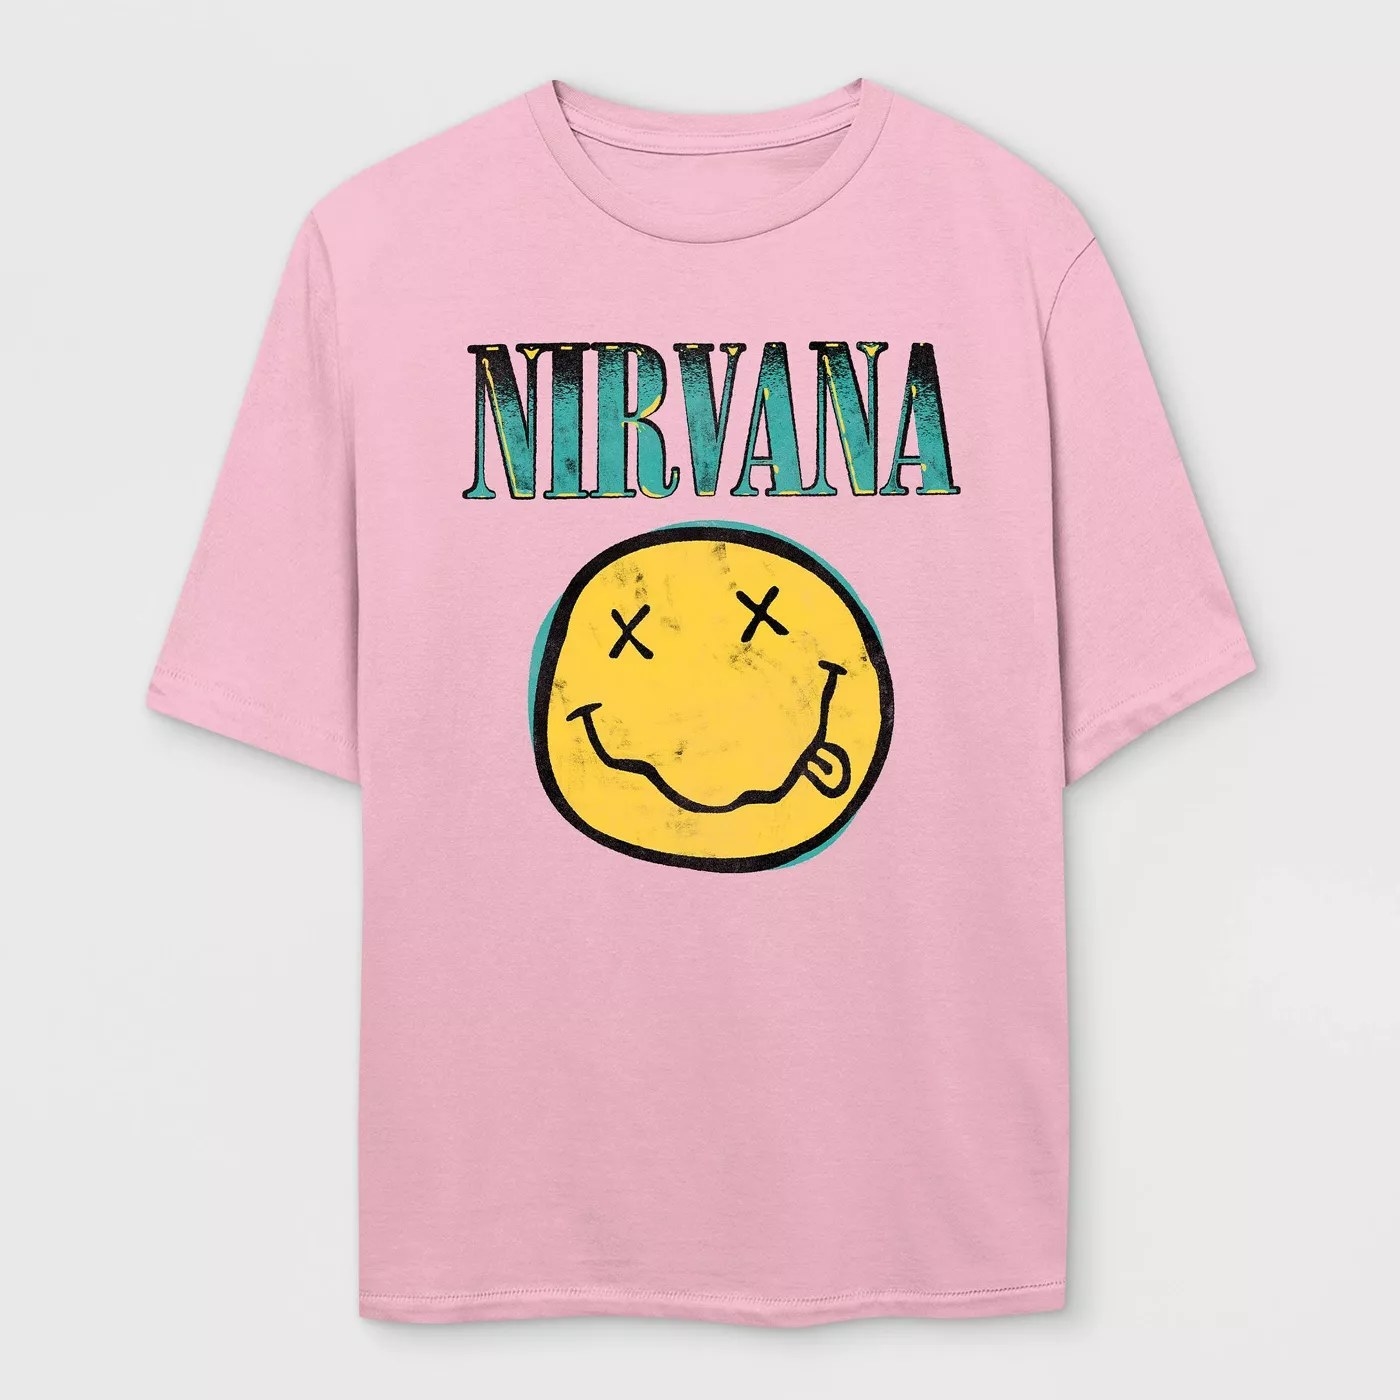 The pink Nirvana T-shirt with a smiley face